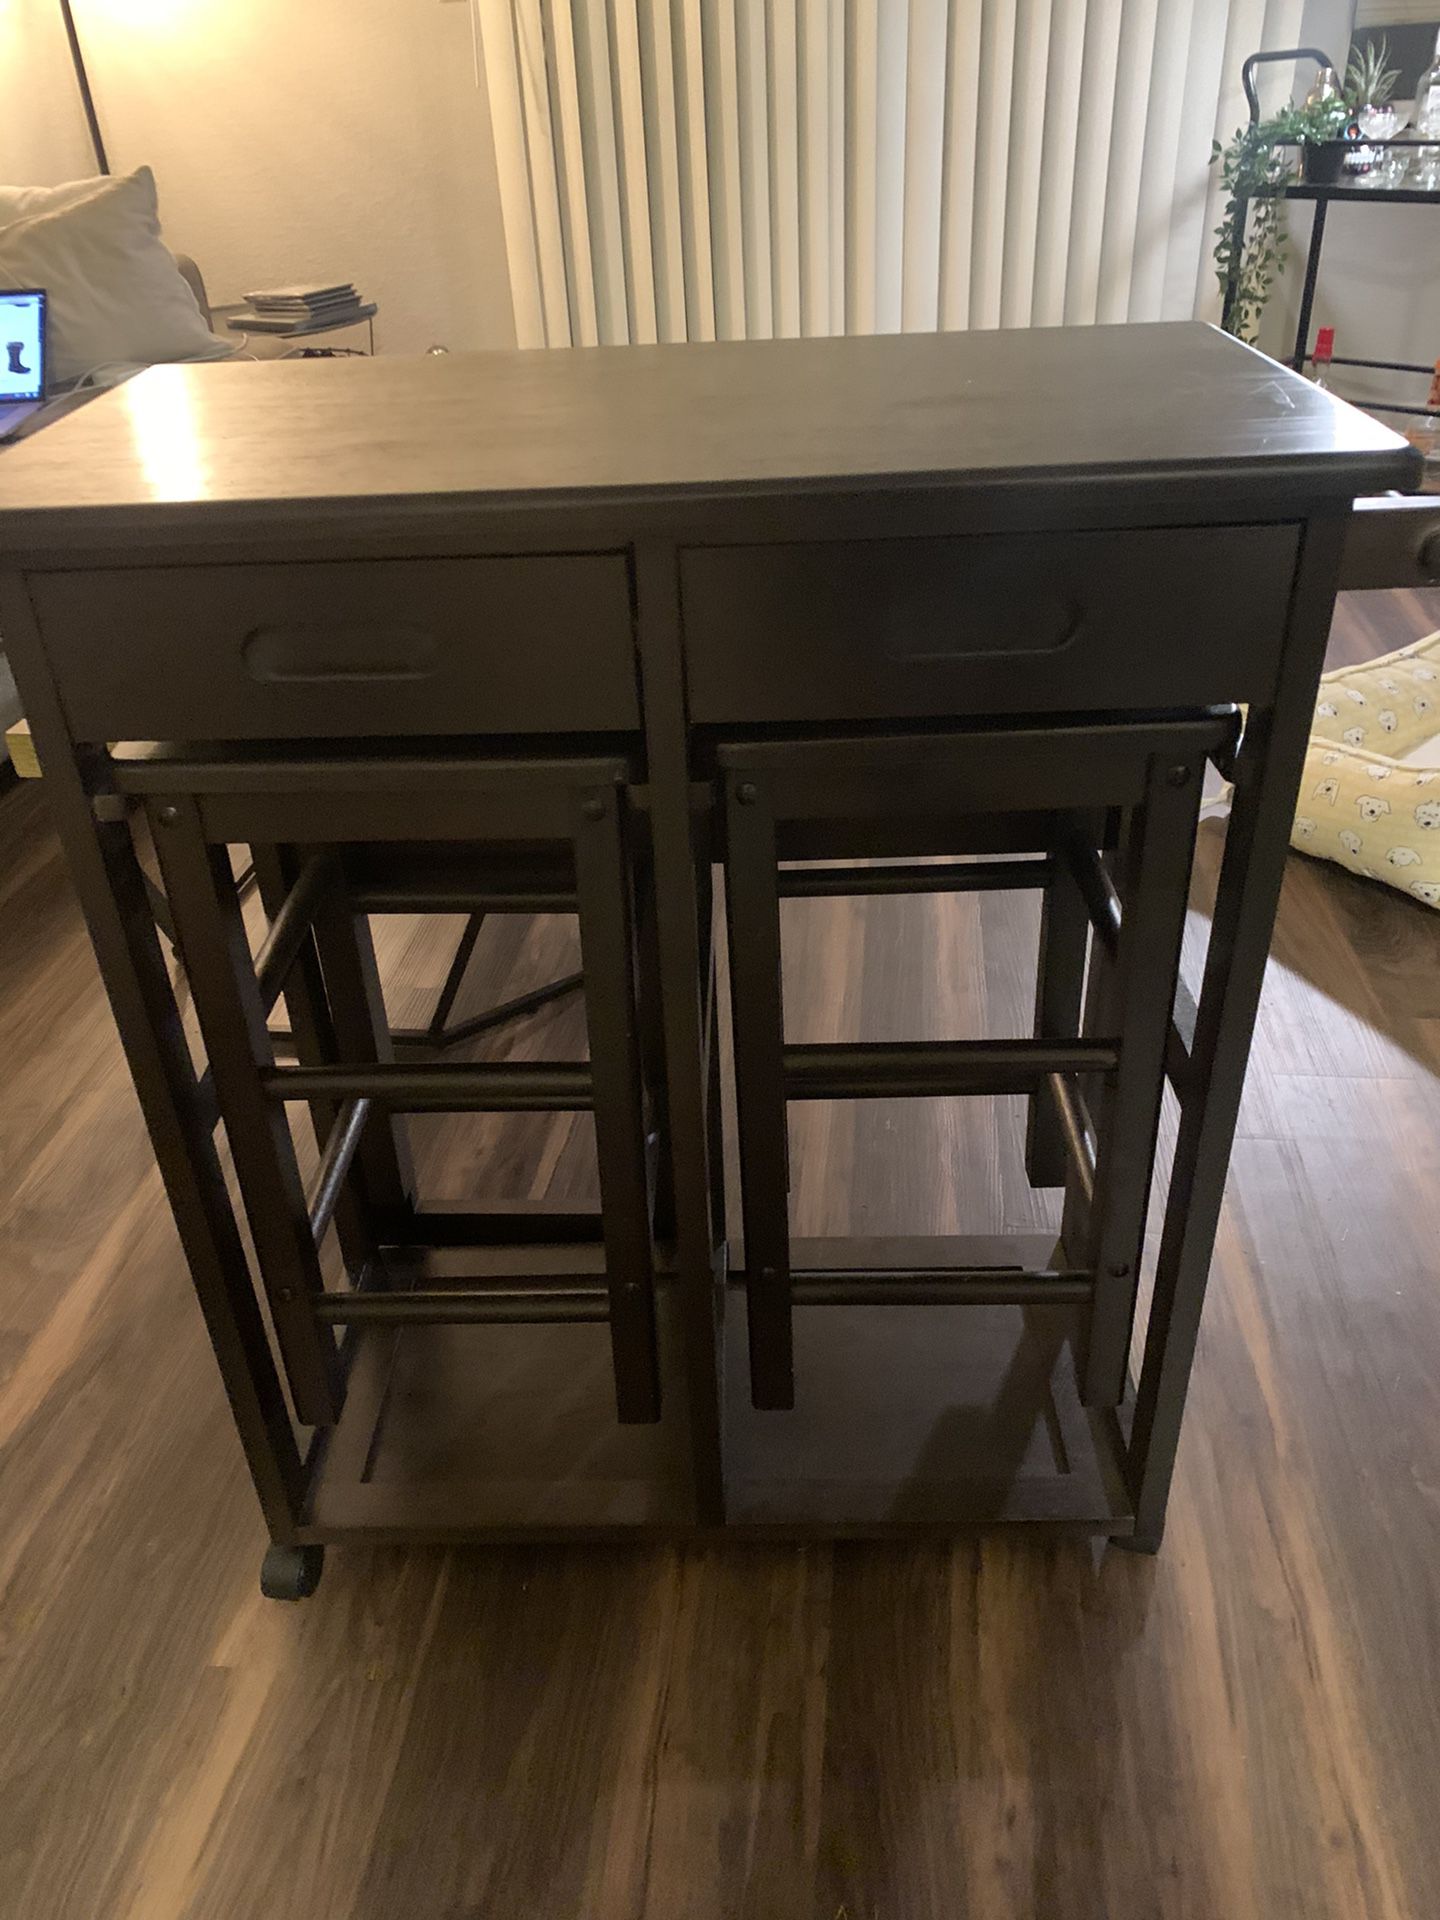 Space saver kitchen table with barstools!